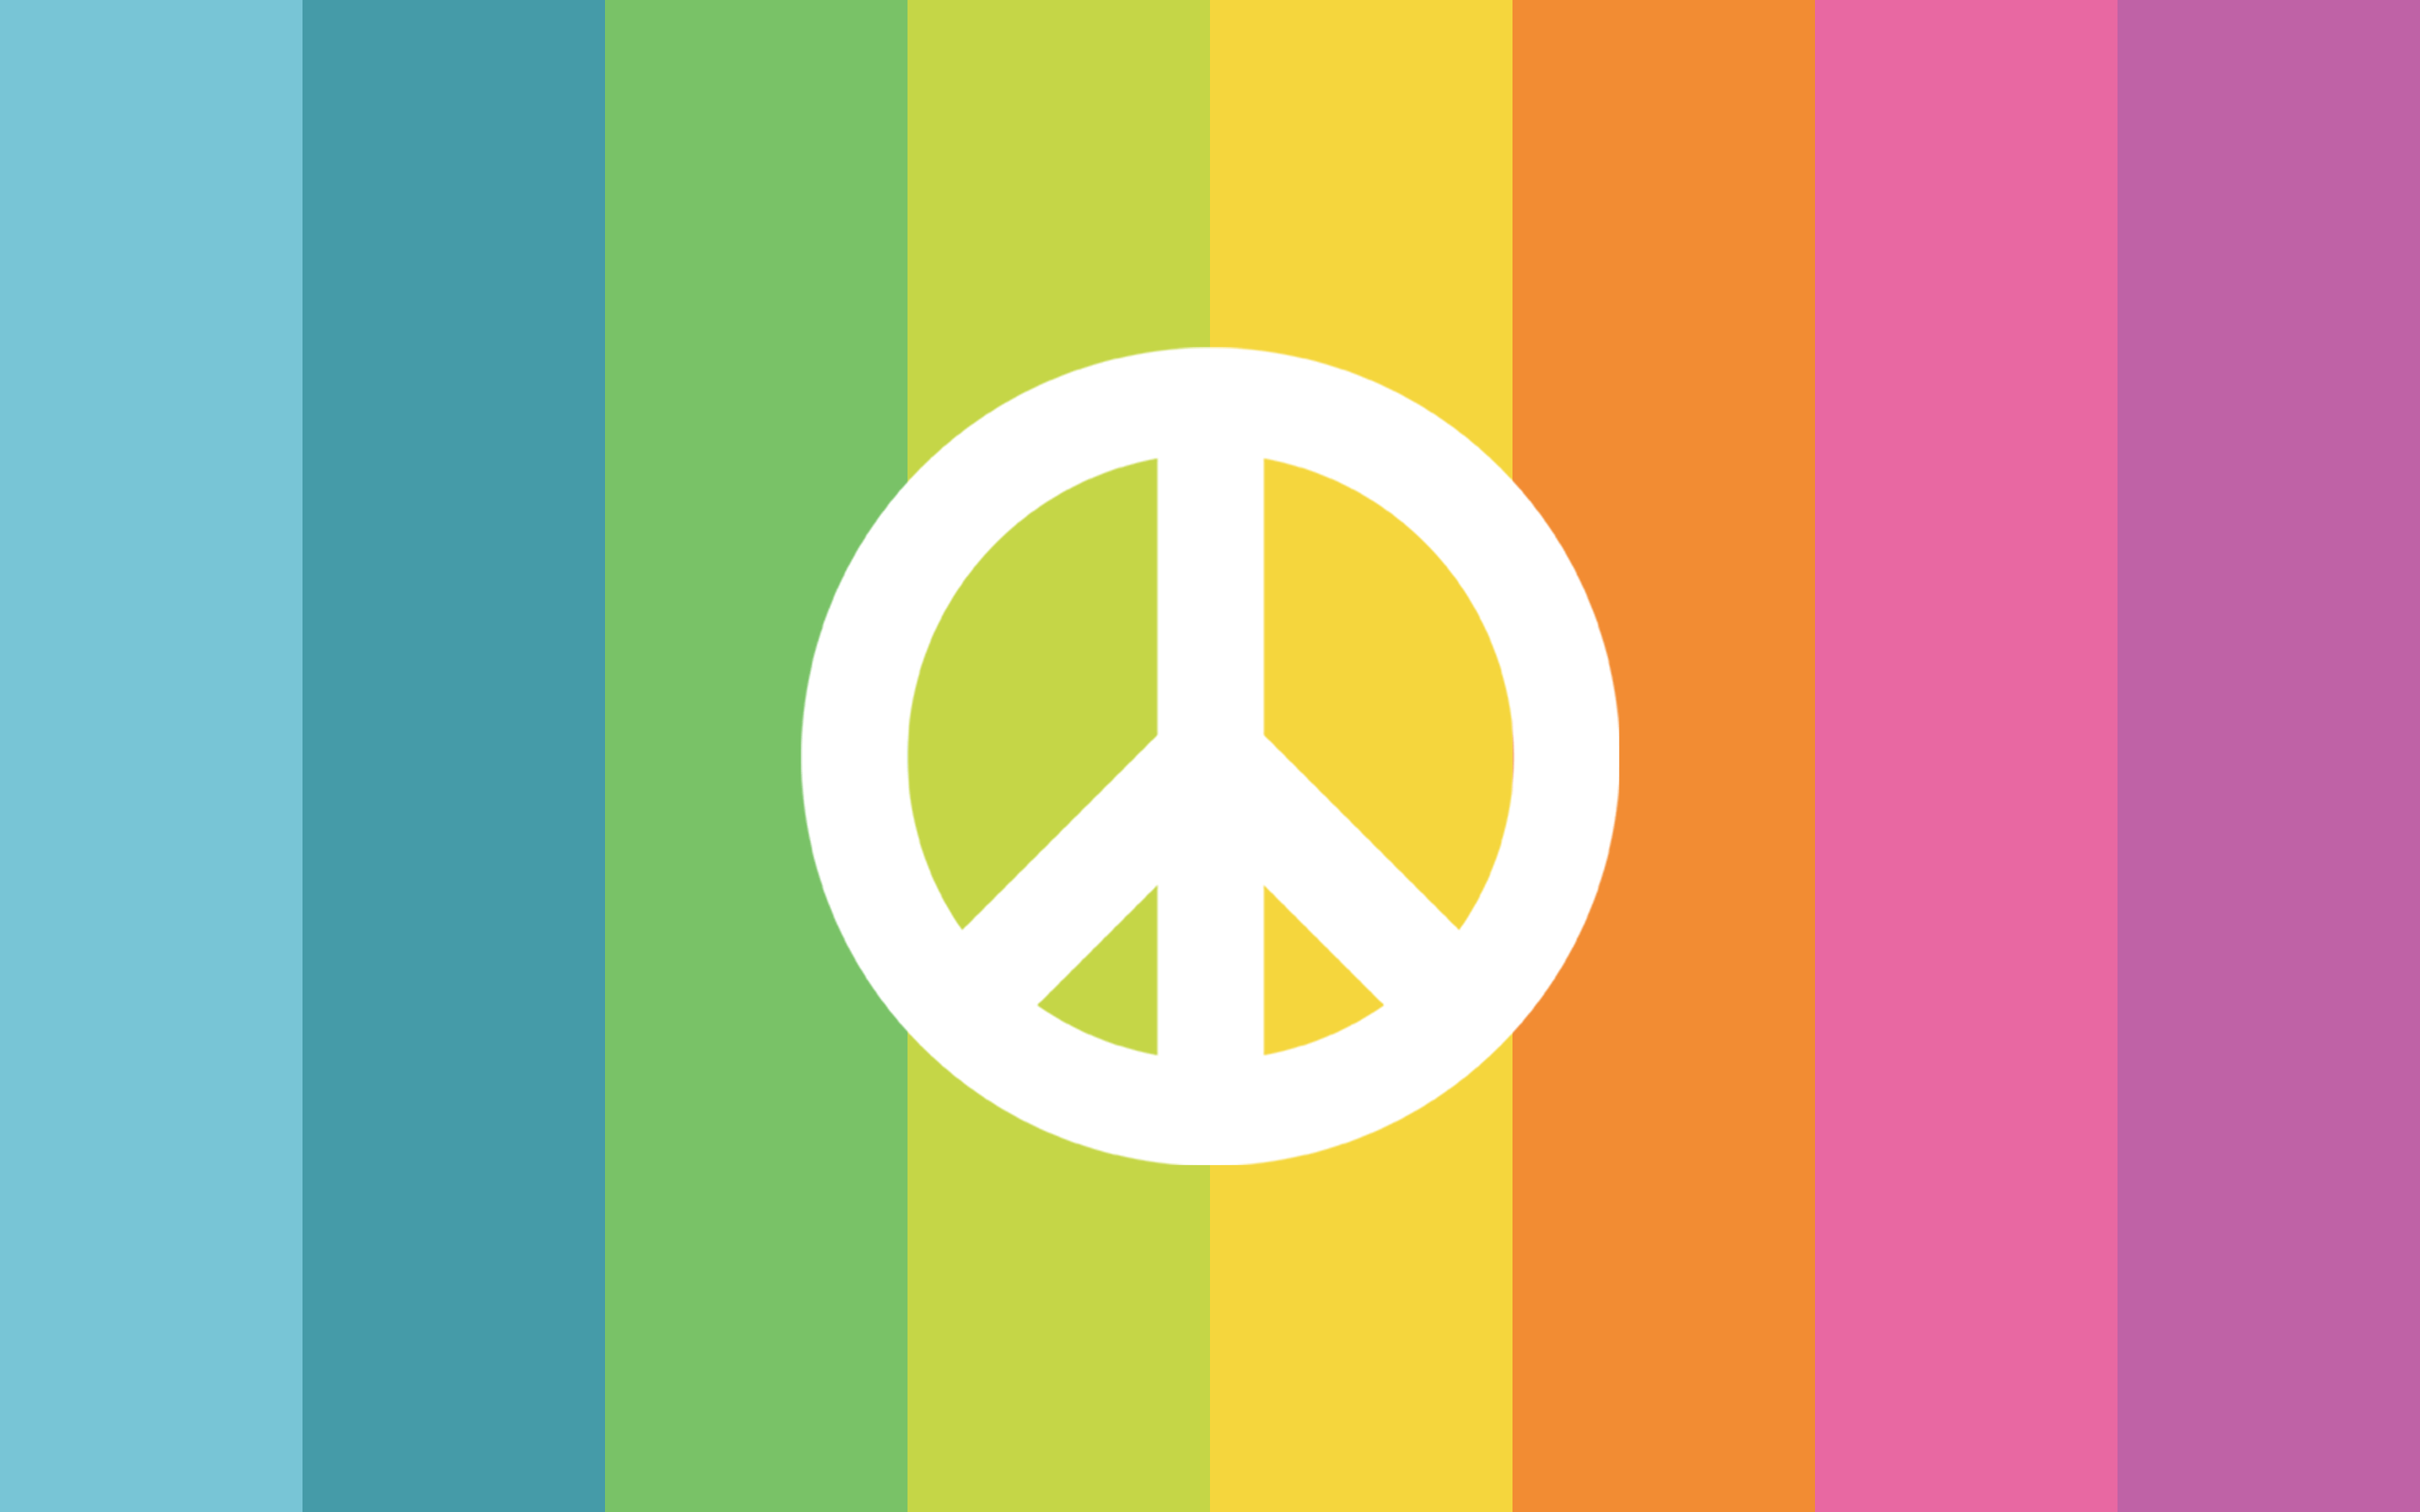 Colorful Peace Wallpaper 20445 2560x1600 px